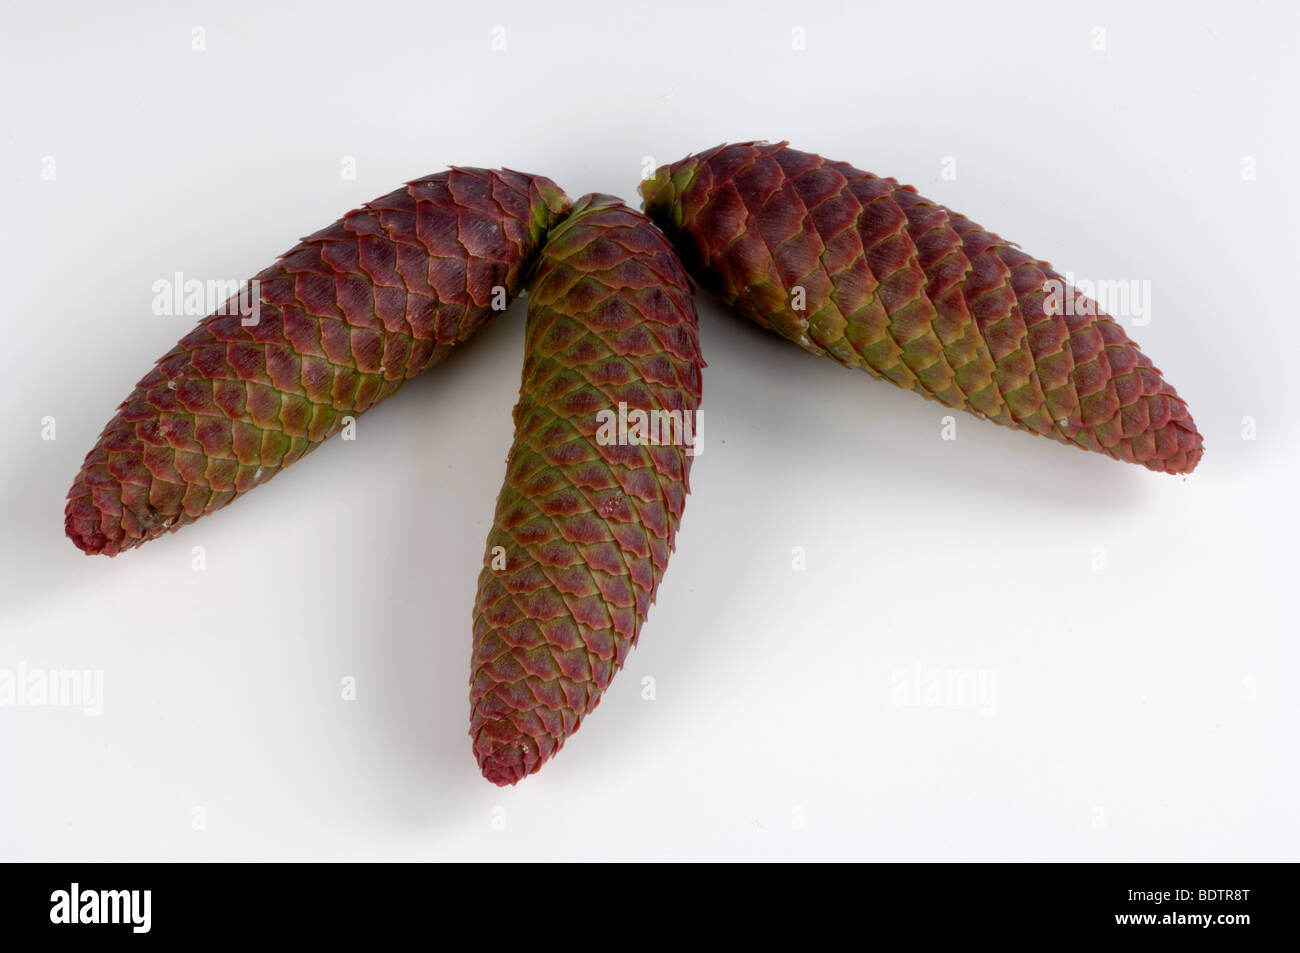 Norway Spruce, cone (Picea abies) cut out Stock Photo